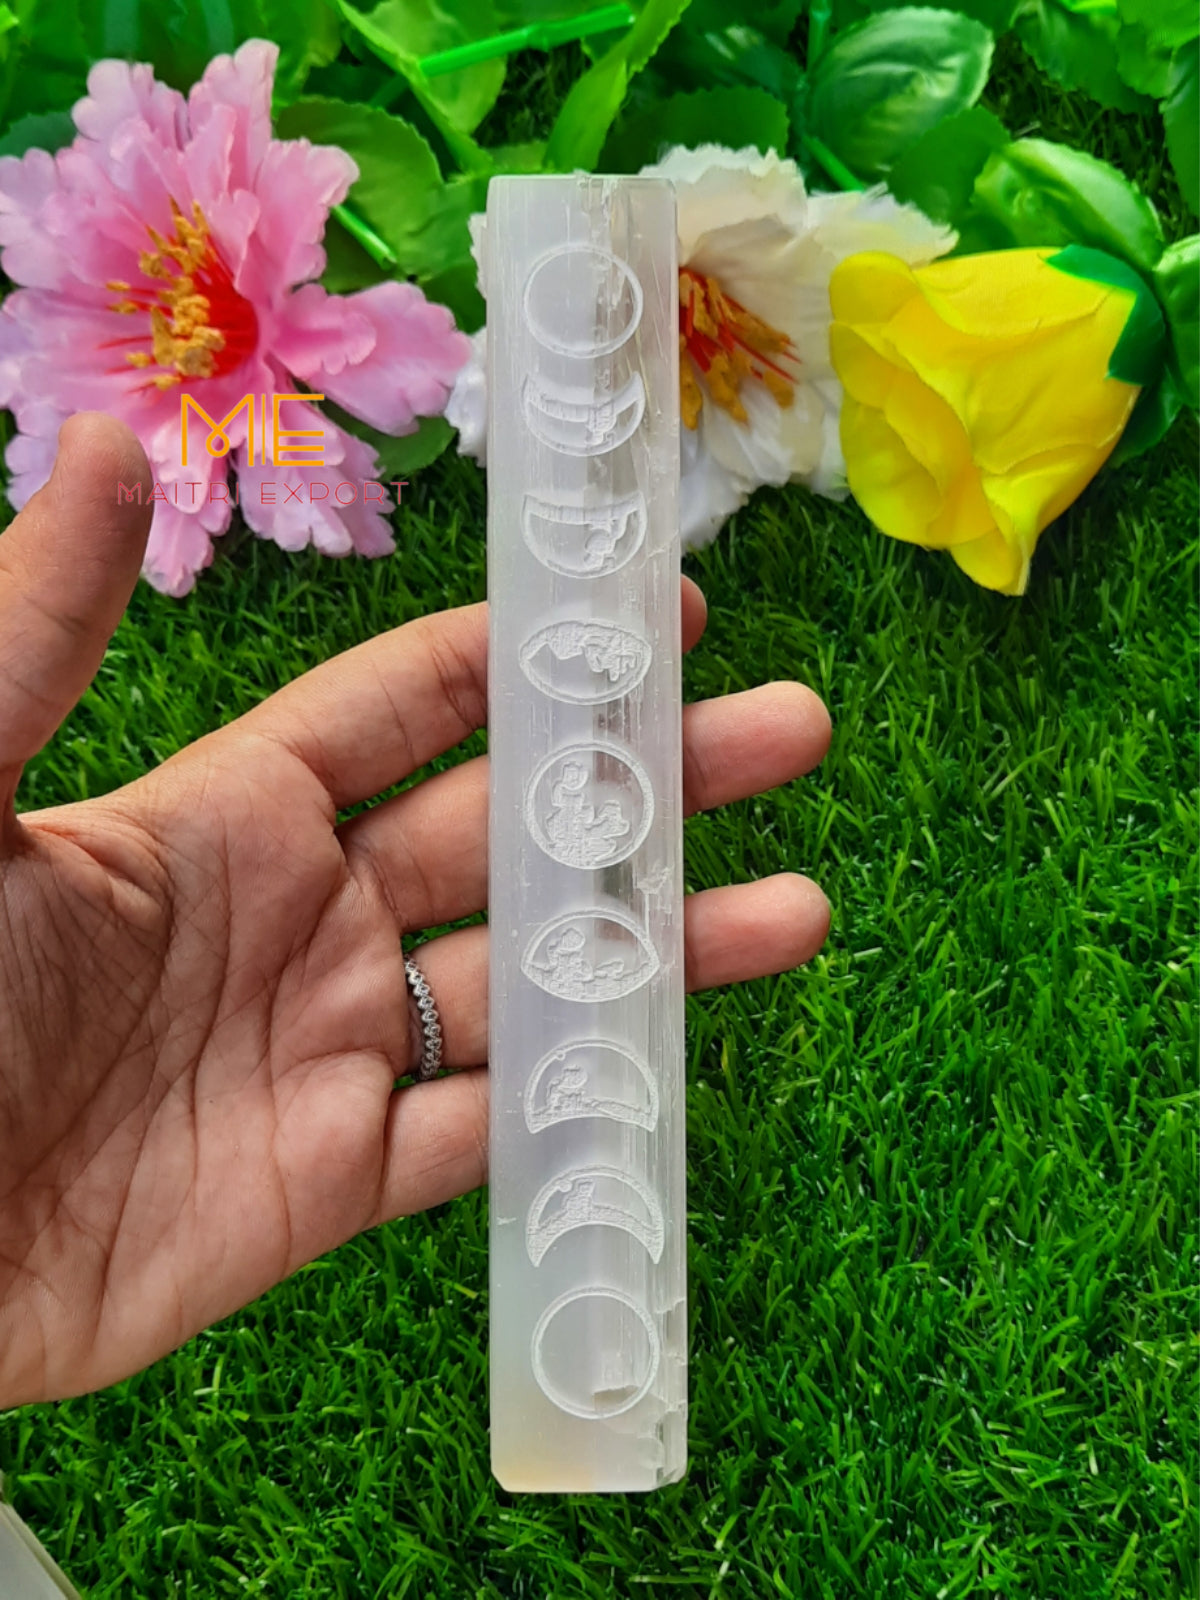 selenite plain and carved stick wands-white moon phases-Maitri Export | Crystals Store